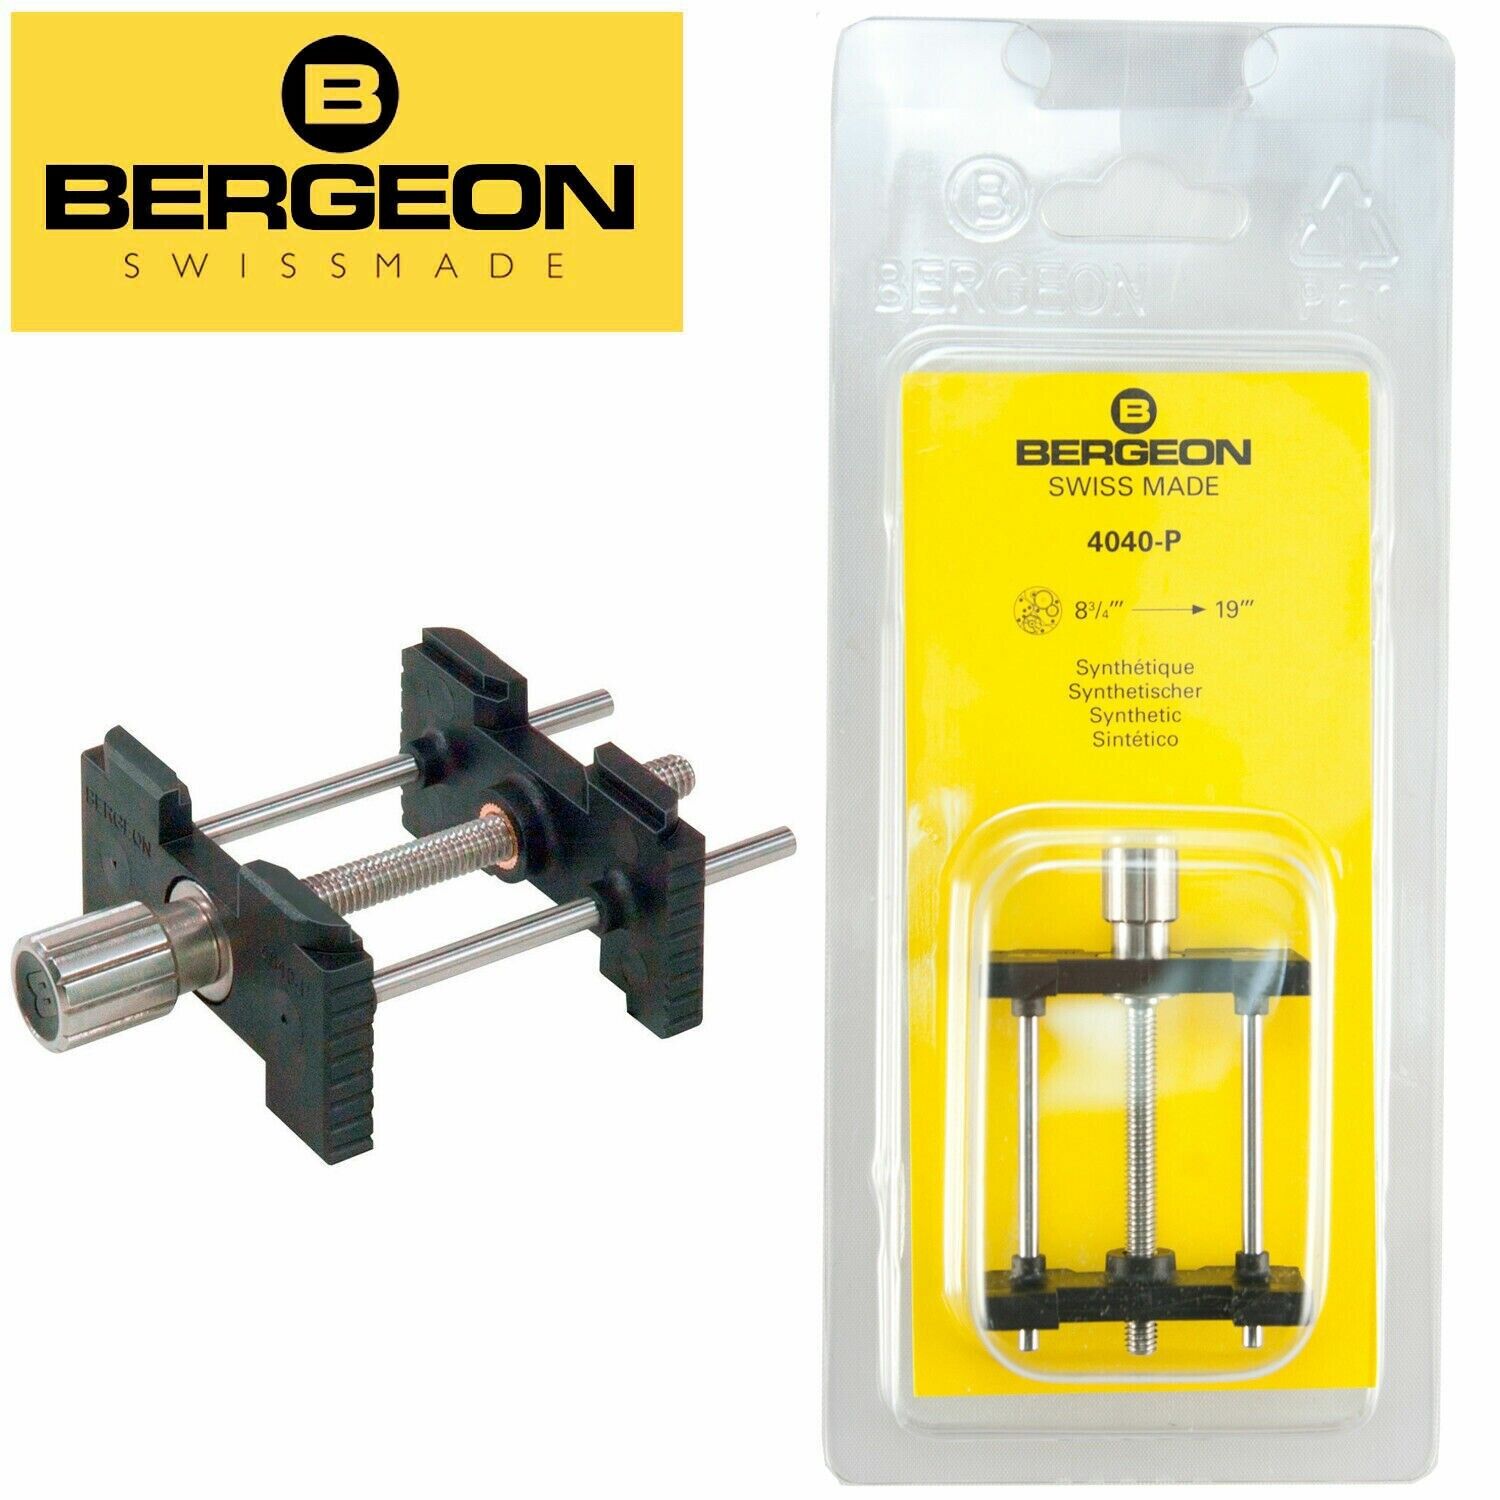 Bergeon 4040-P Extensible and Reversible Synthetic Movement Holder 8 3/4\'\' - 19\'